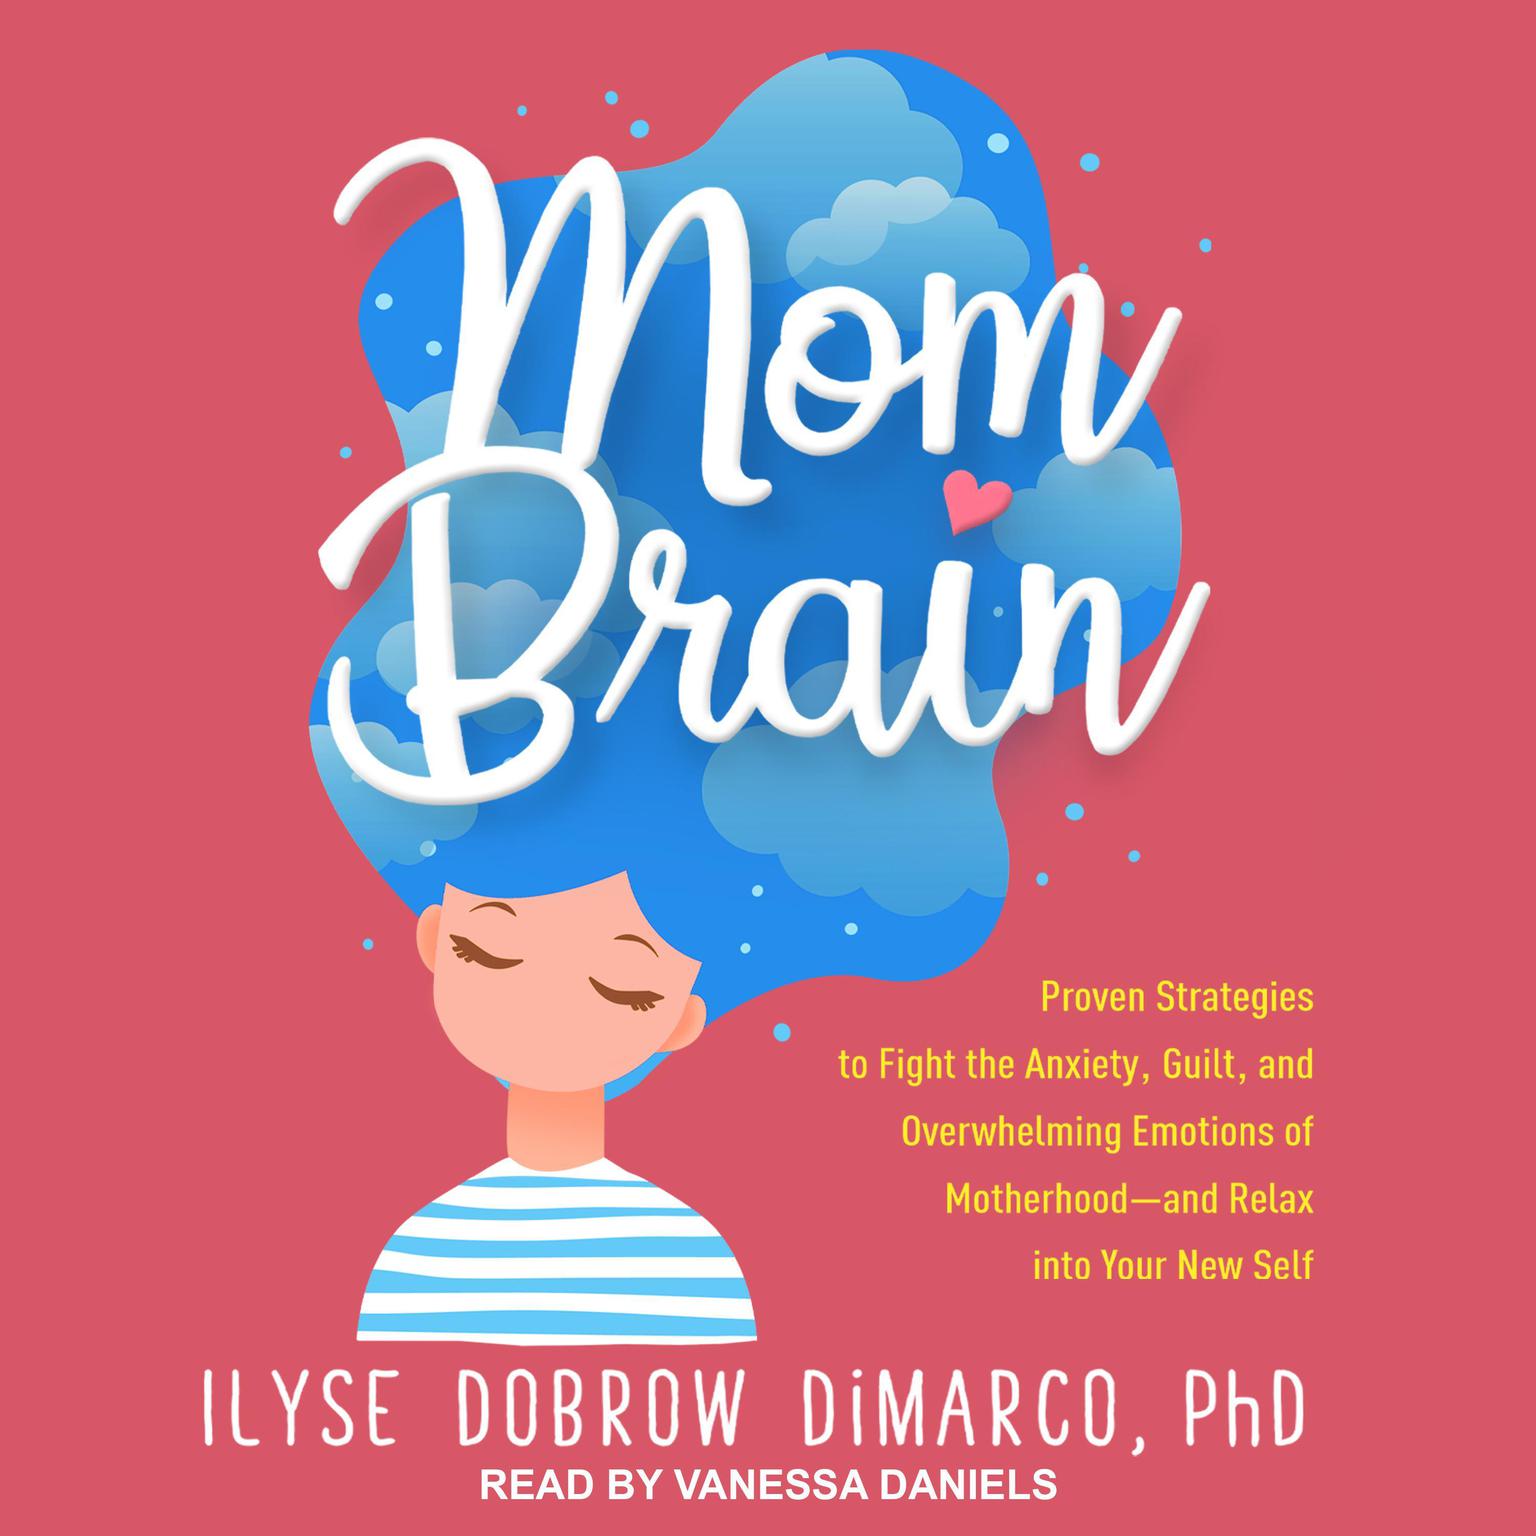 Mom Brain: Proven Strategies to Fight the Anxiety, Guilt, and Overwhelming Emotions of Motherhood-and Relax into Your New Self Audiobook, by Ilyse Dobrow DiMarco